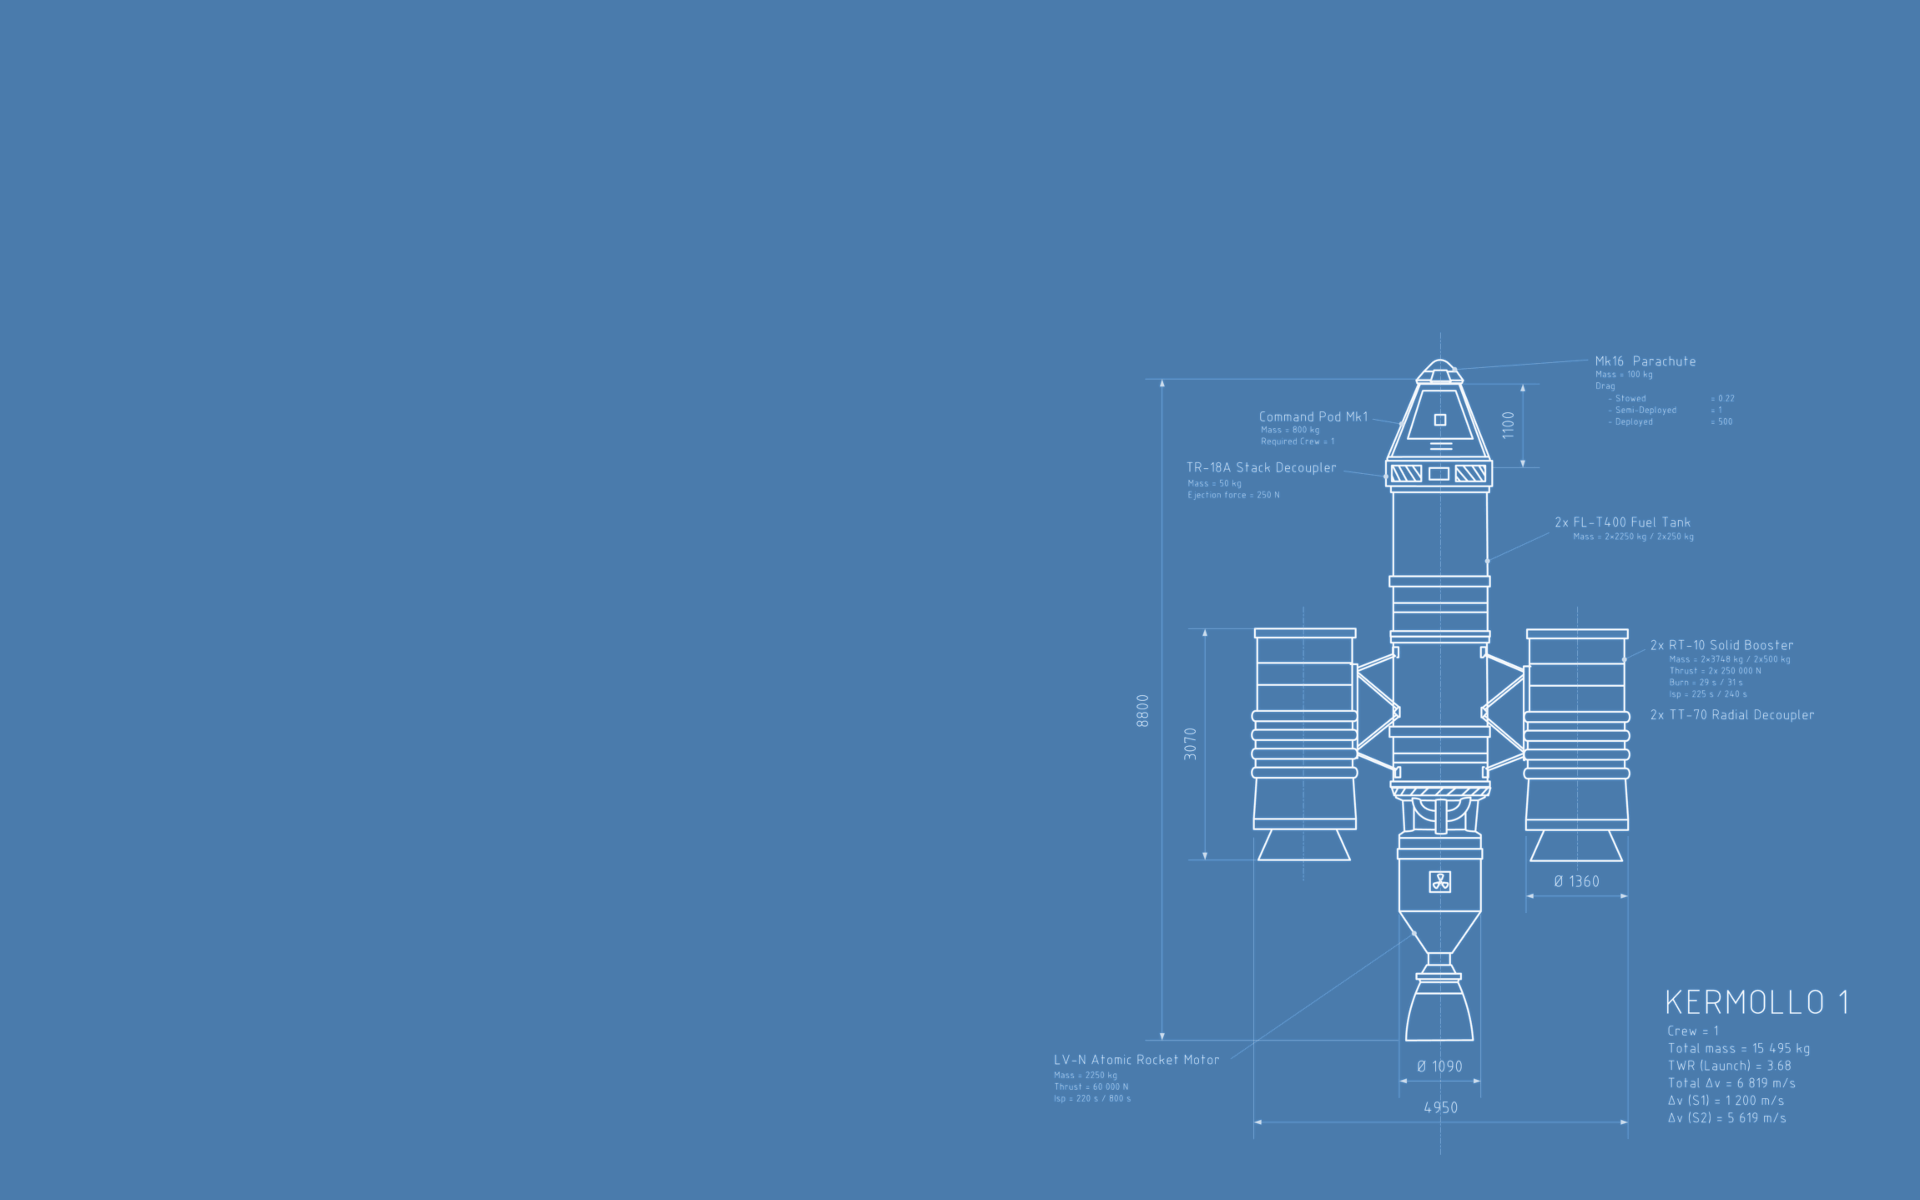 I Made A Blueprint Wallpaper Of A Small Rocket And Thought You Might Like It!